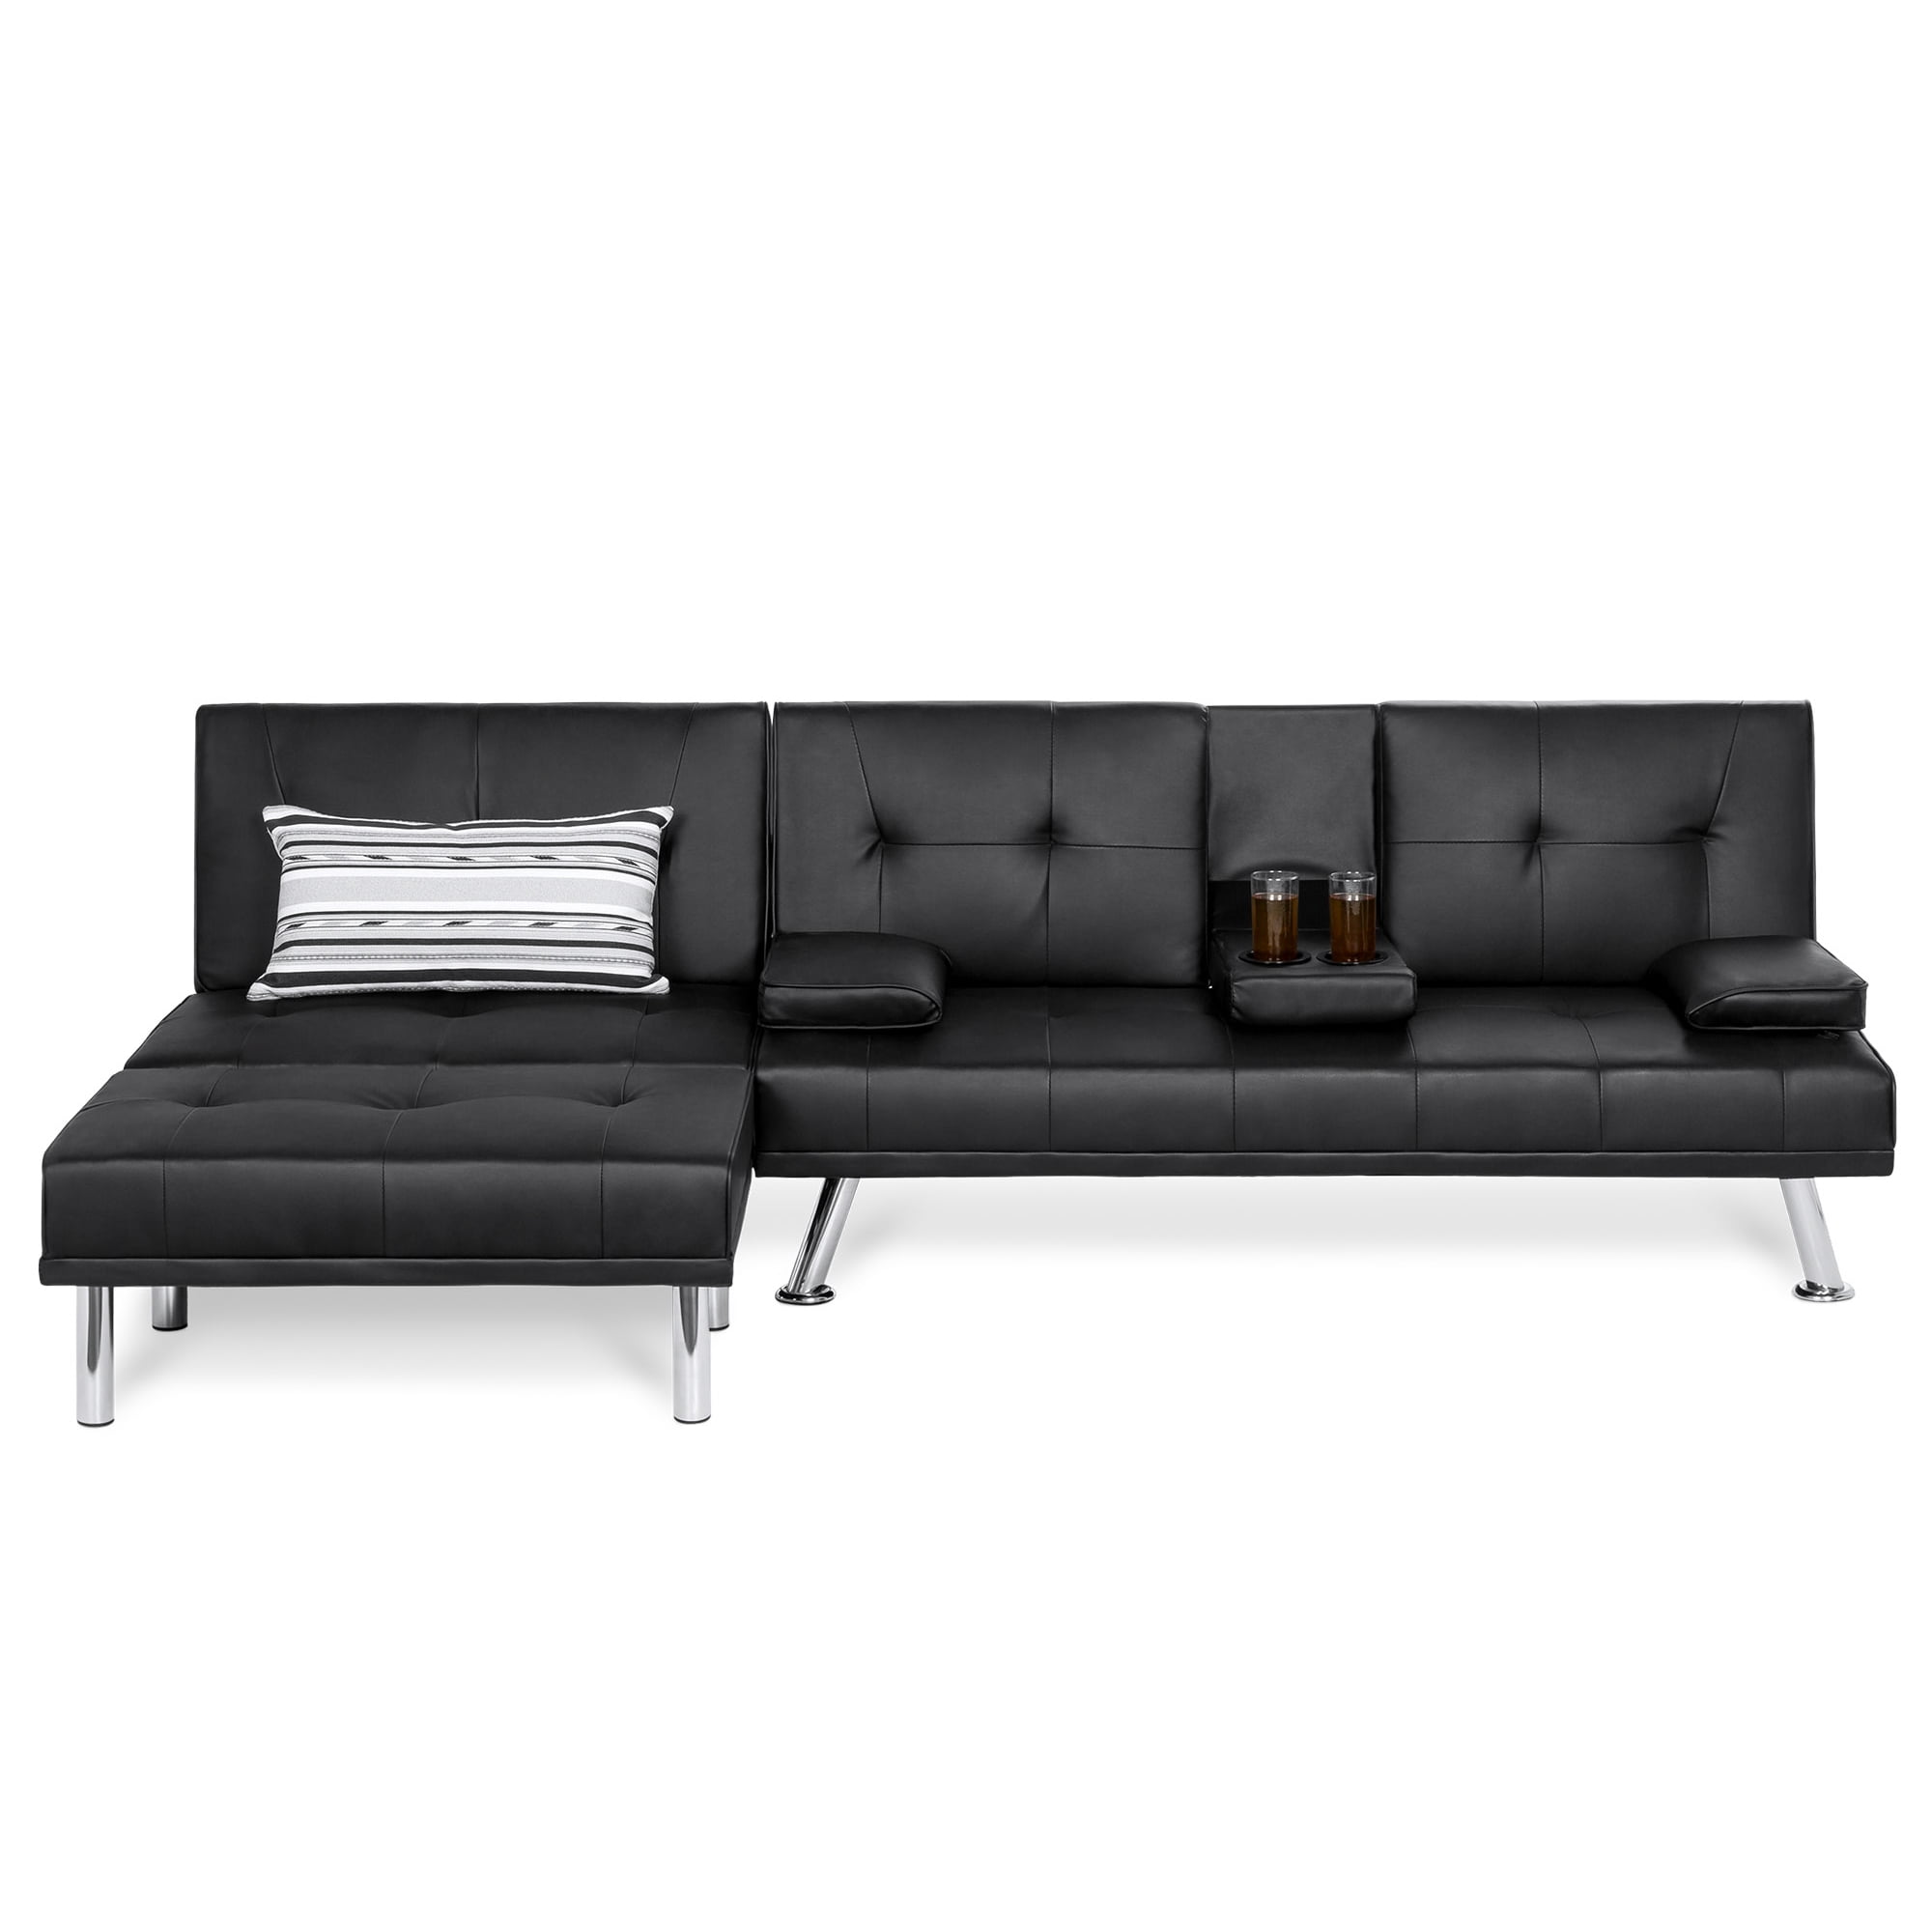 Yaheetech Faux Leather Sectional Sofa, Black Leather Couch Sofa Bed